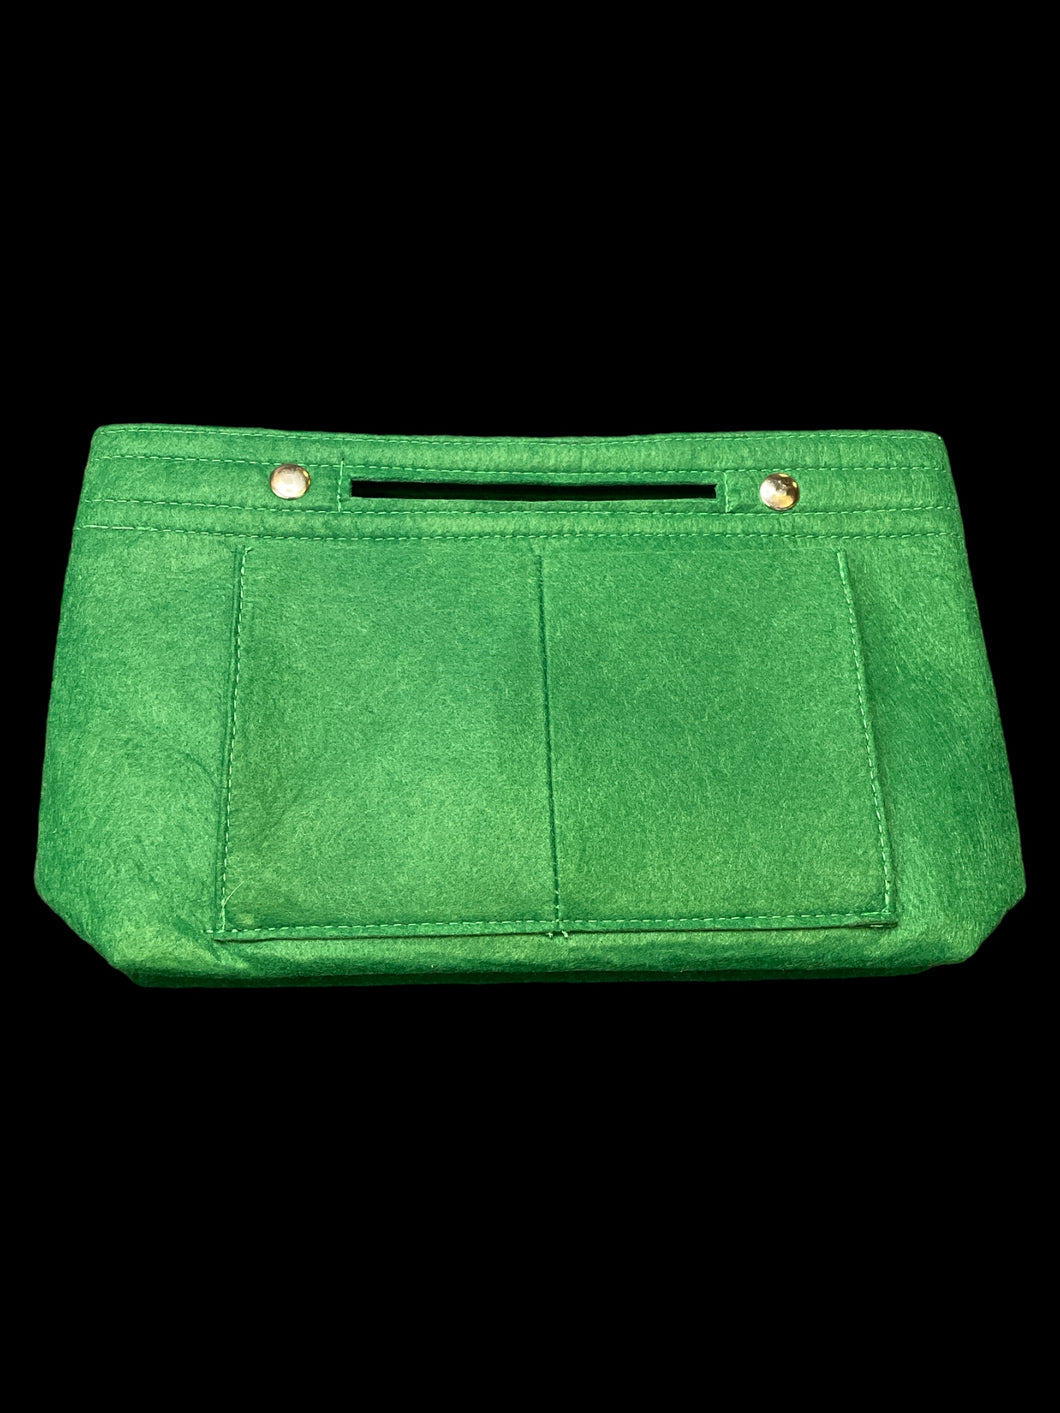 Forest green felt purse w/ green stitching, small handle, outer & inner pockets, & silver like snap closure